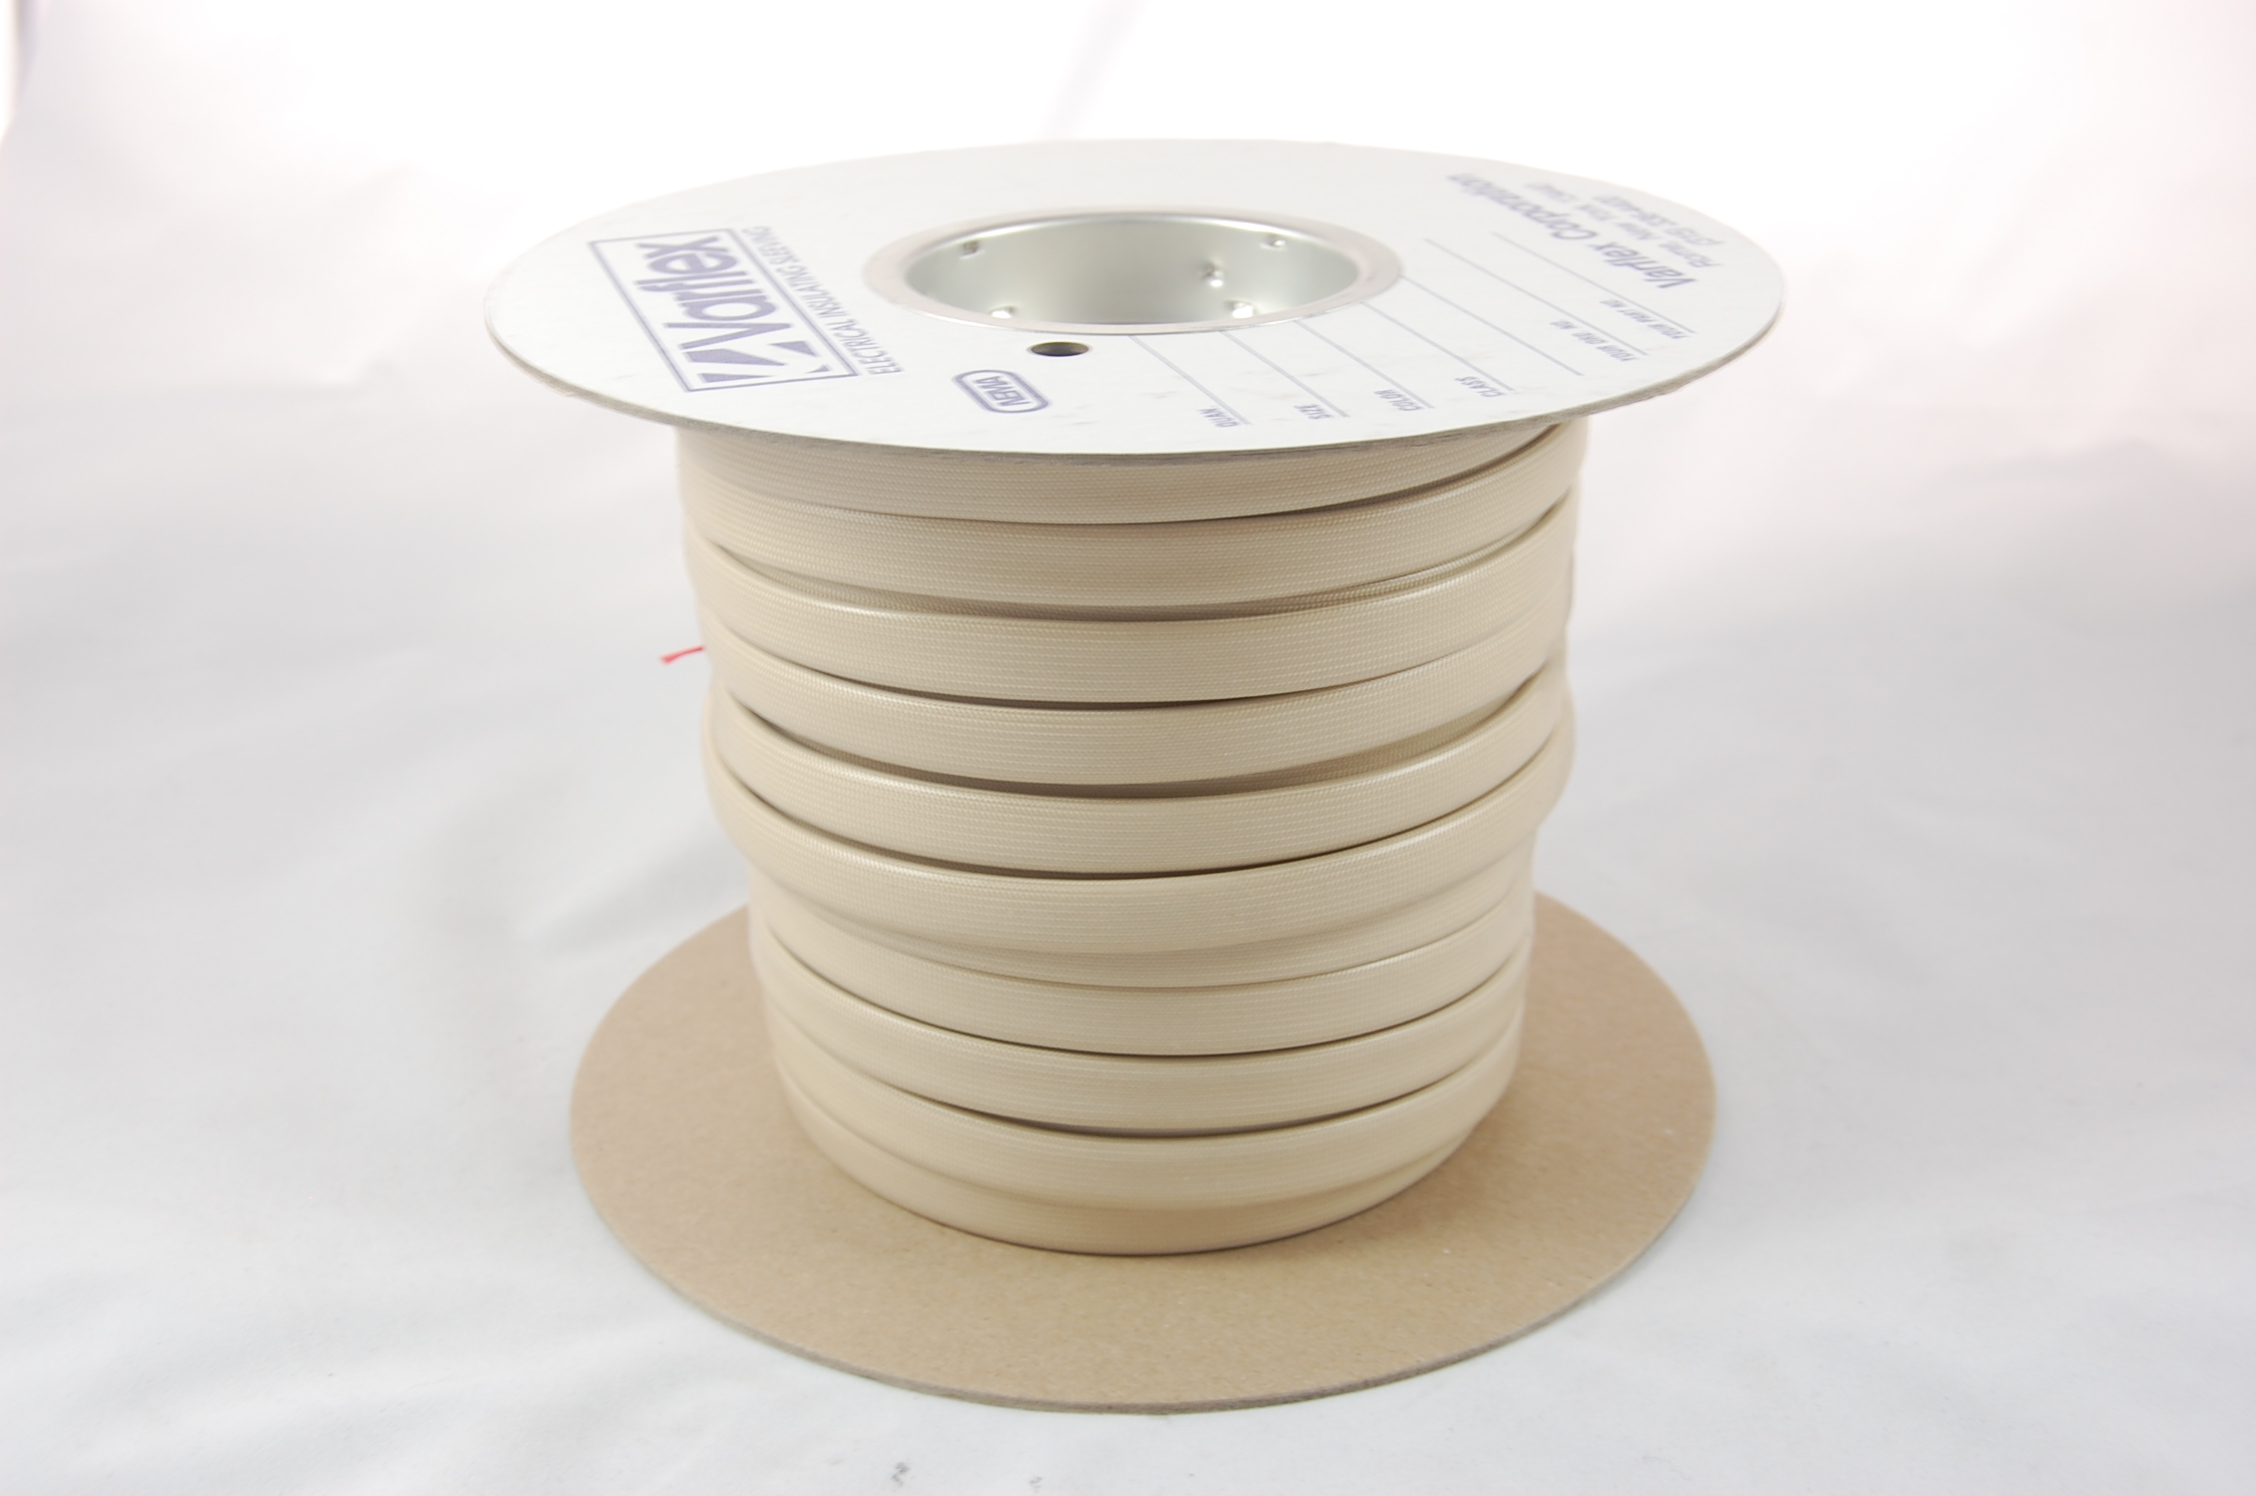 #4 AWG Varglas Silicone Rubber Grade H-A-1 (8000V) High Temperature Silicone Rubber Coated Braided Fiberglass Sleeving 200°C, natural, 150 FT per spool